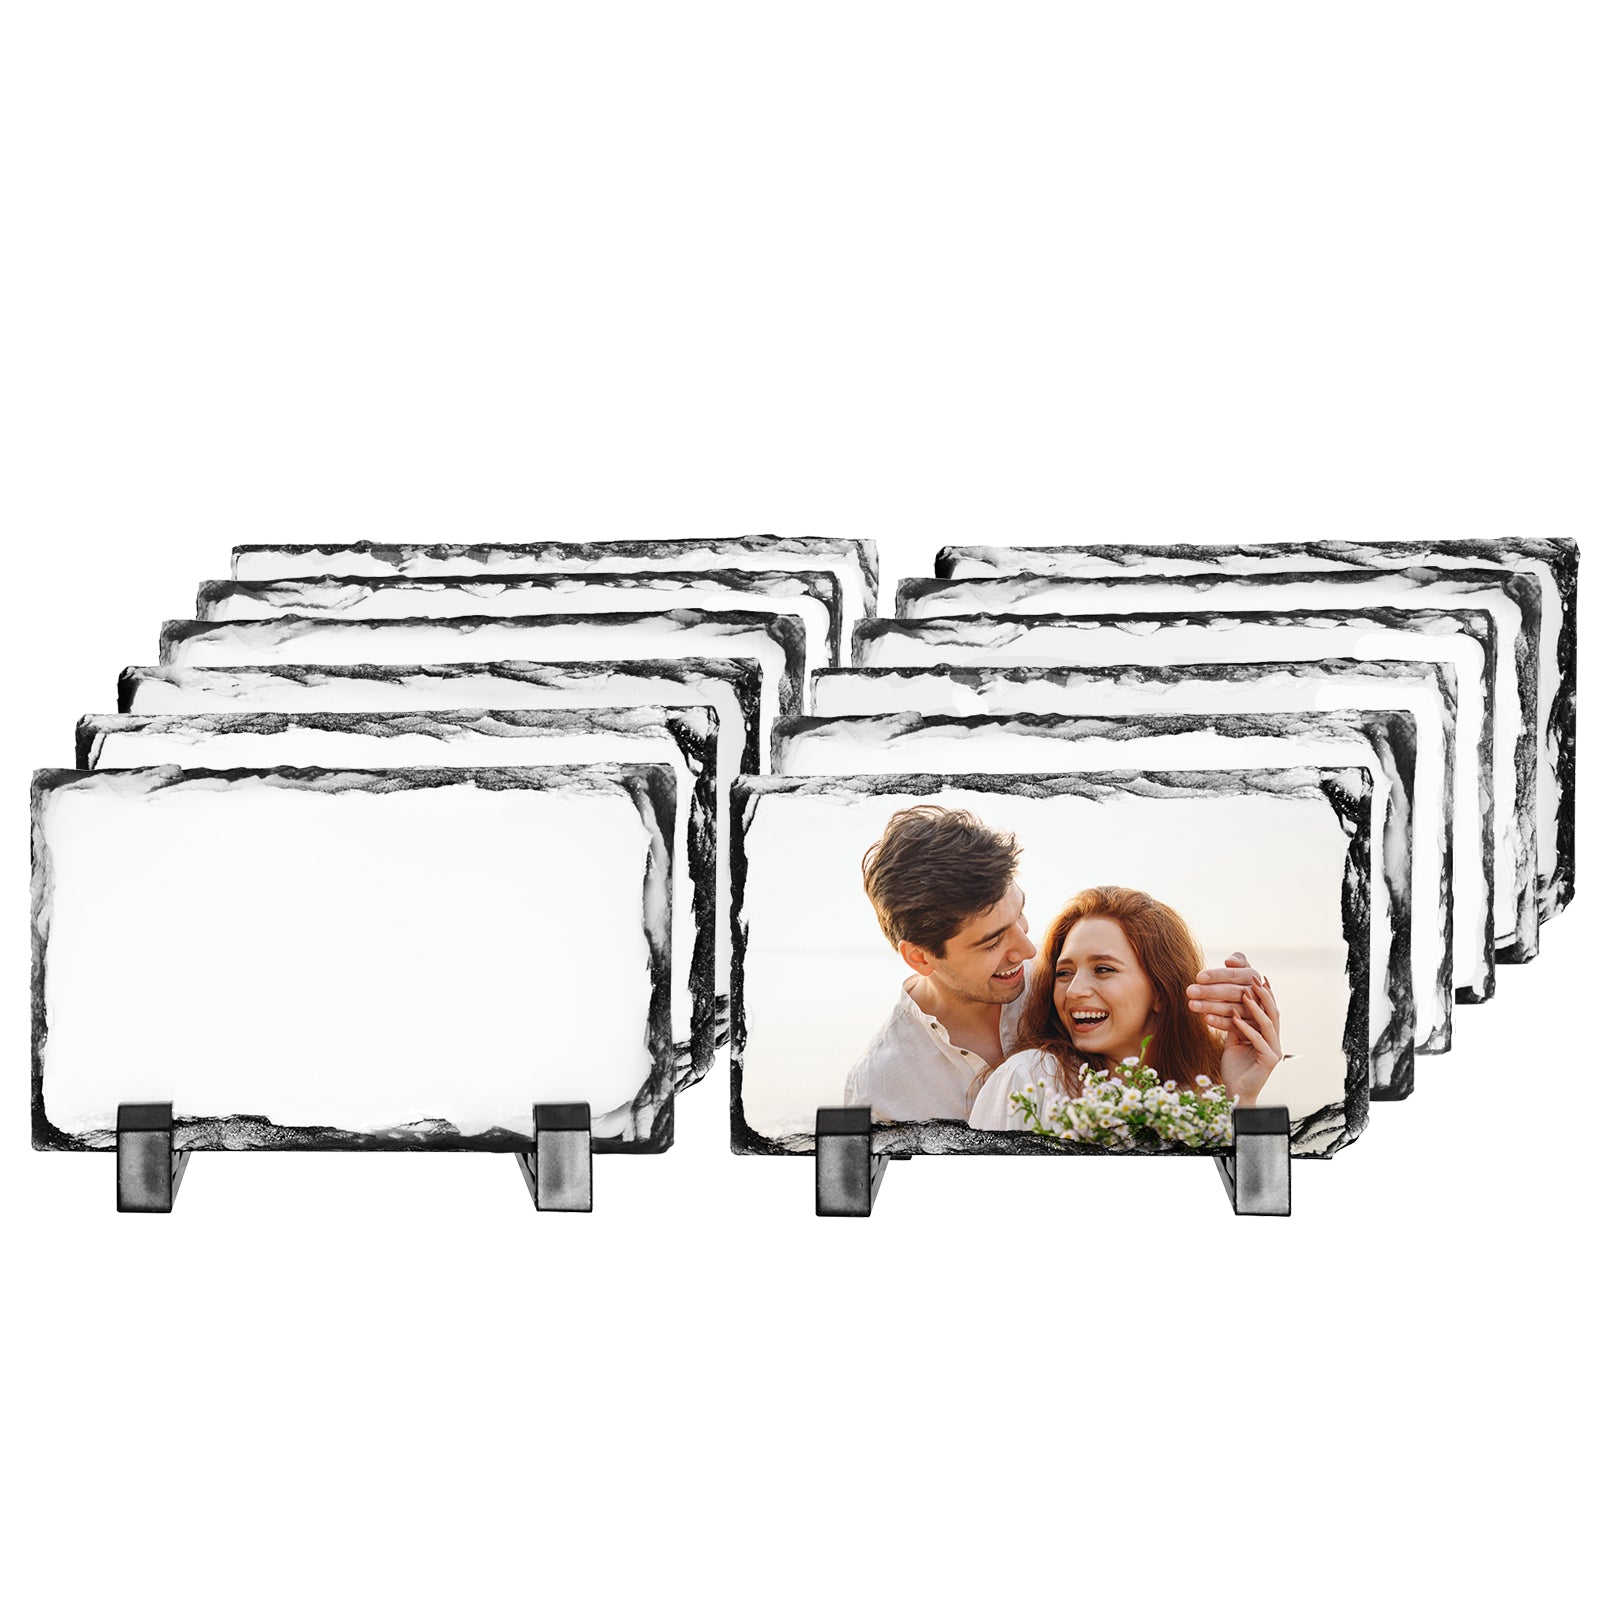 PYD Life 12 Pack Sublimation Photo Slates Rock Blanks 3.5 x 5.5 inch Bulk Stone Frame White with Display Holder for Heat Transfer Printing